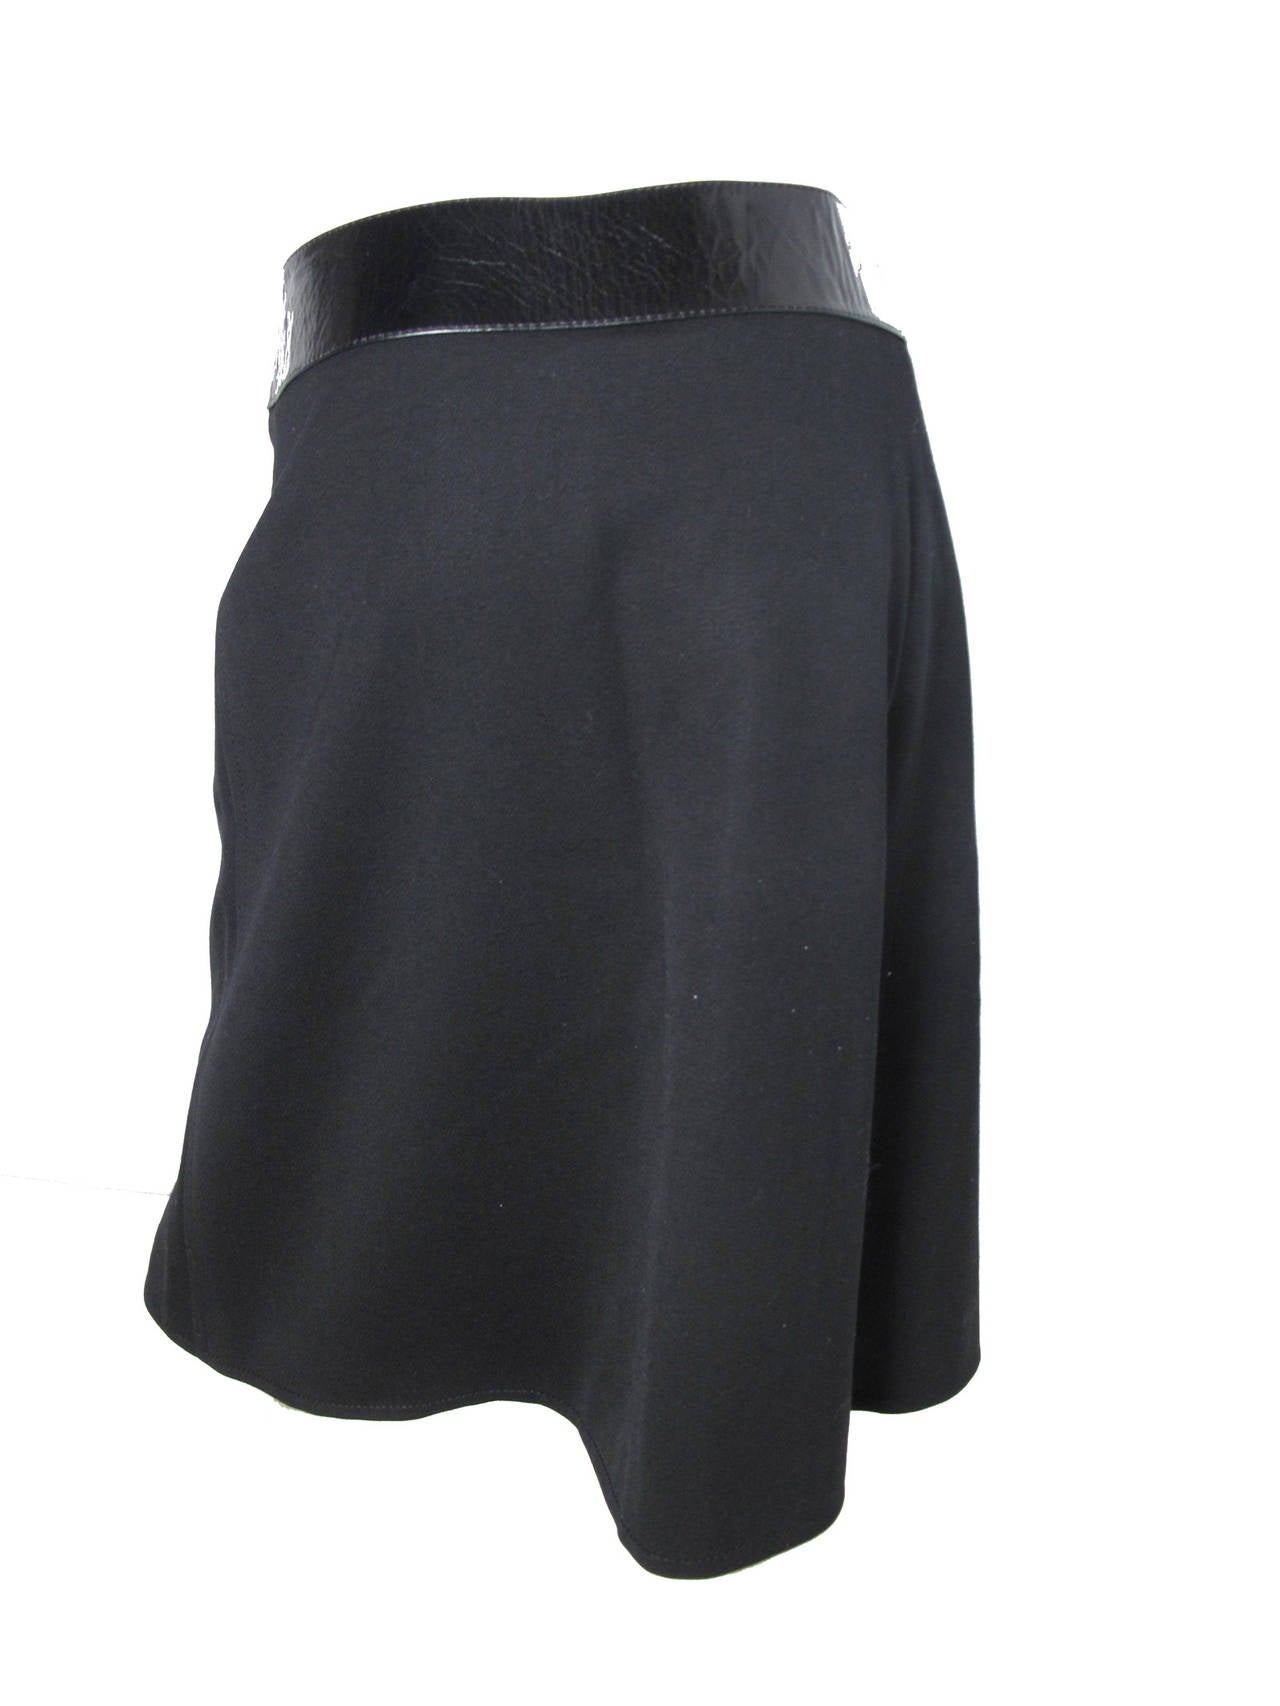 Celine black wool wrap skirt with leather waist band In Excellent Condition In Austin, TX